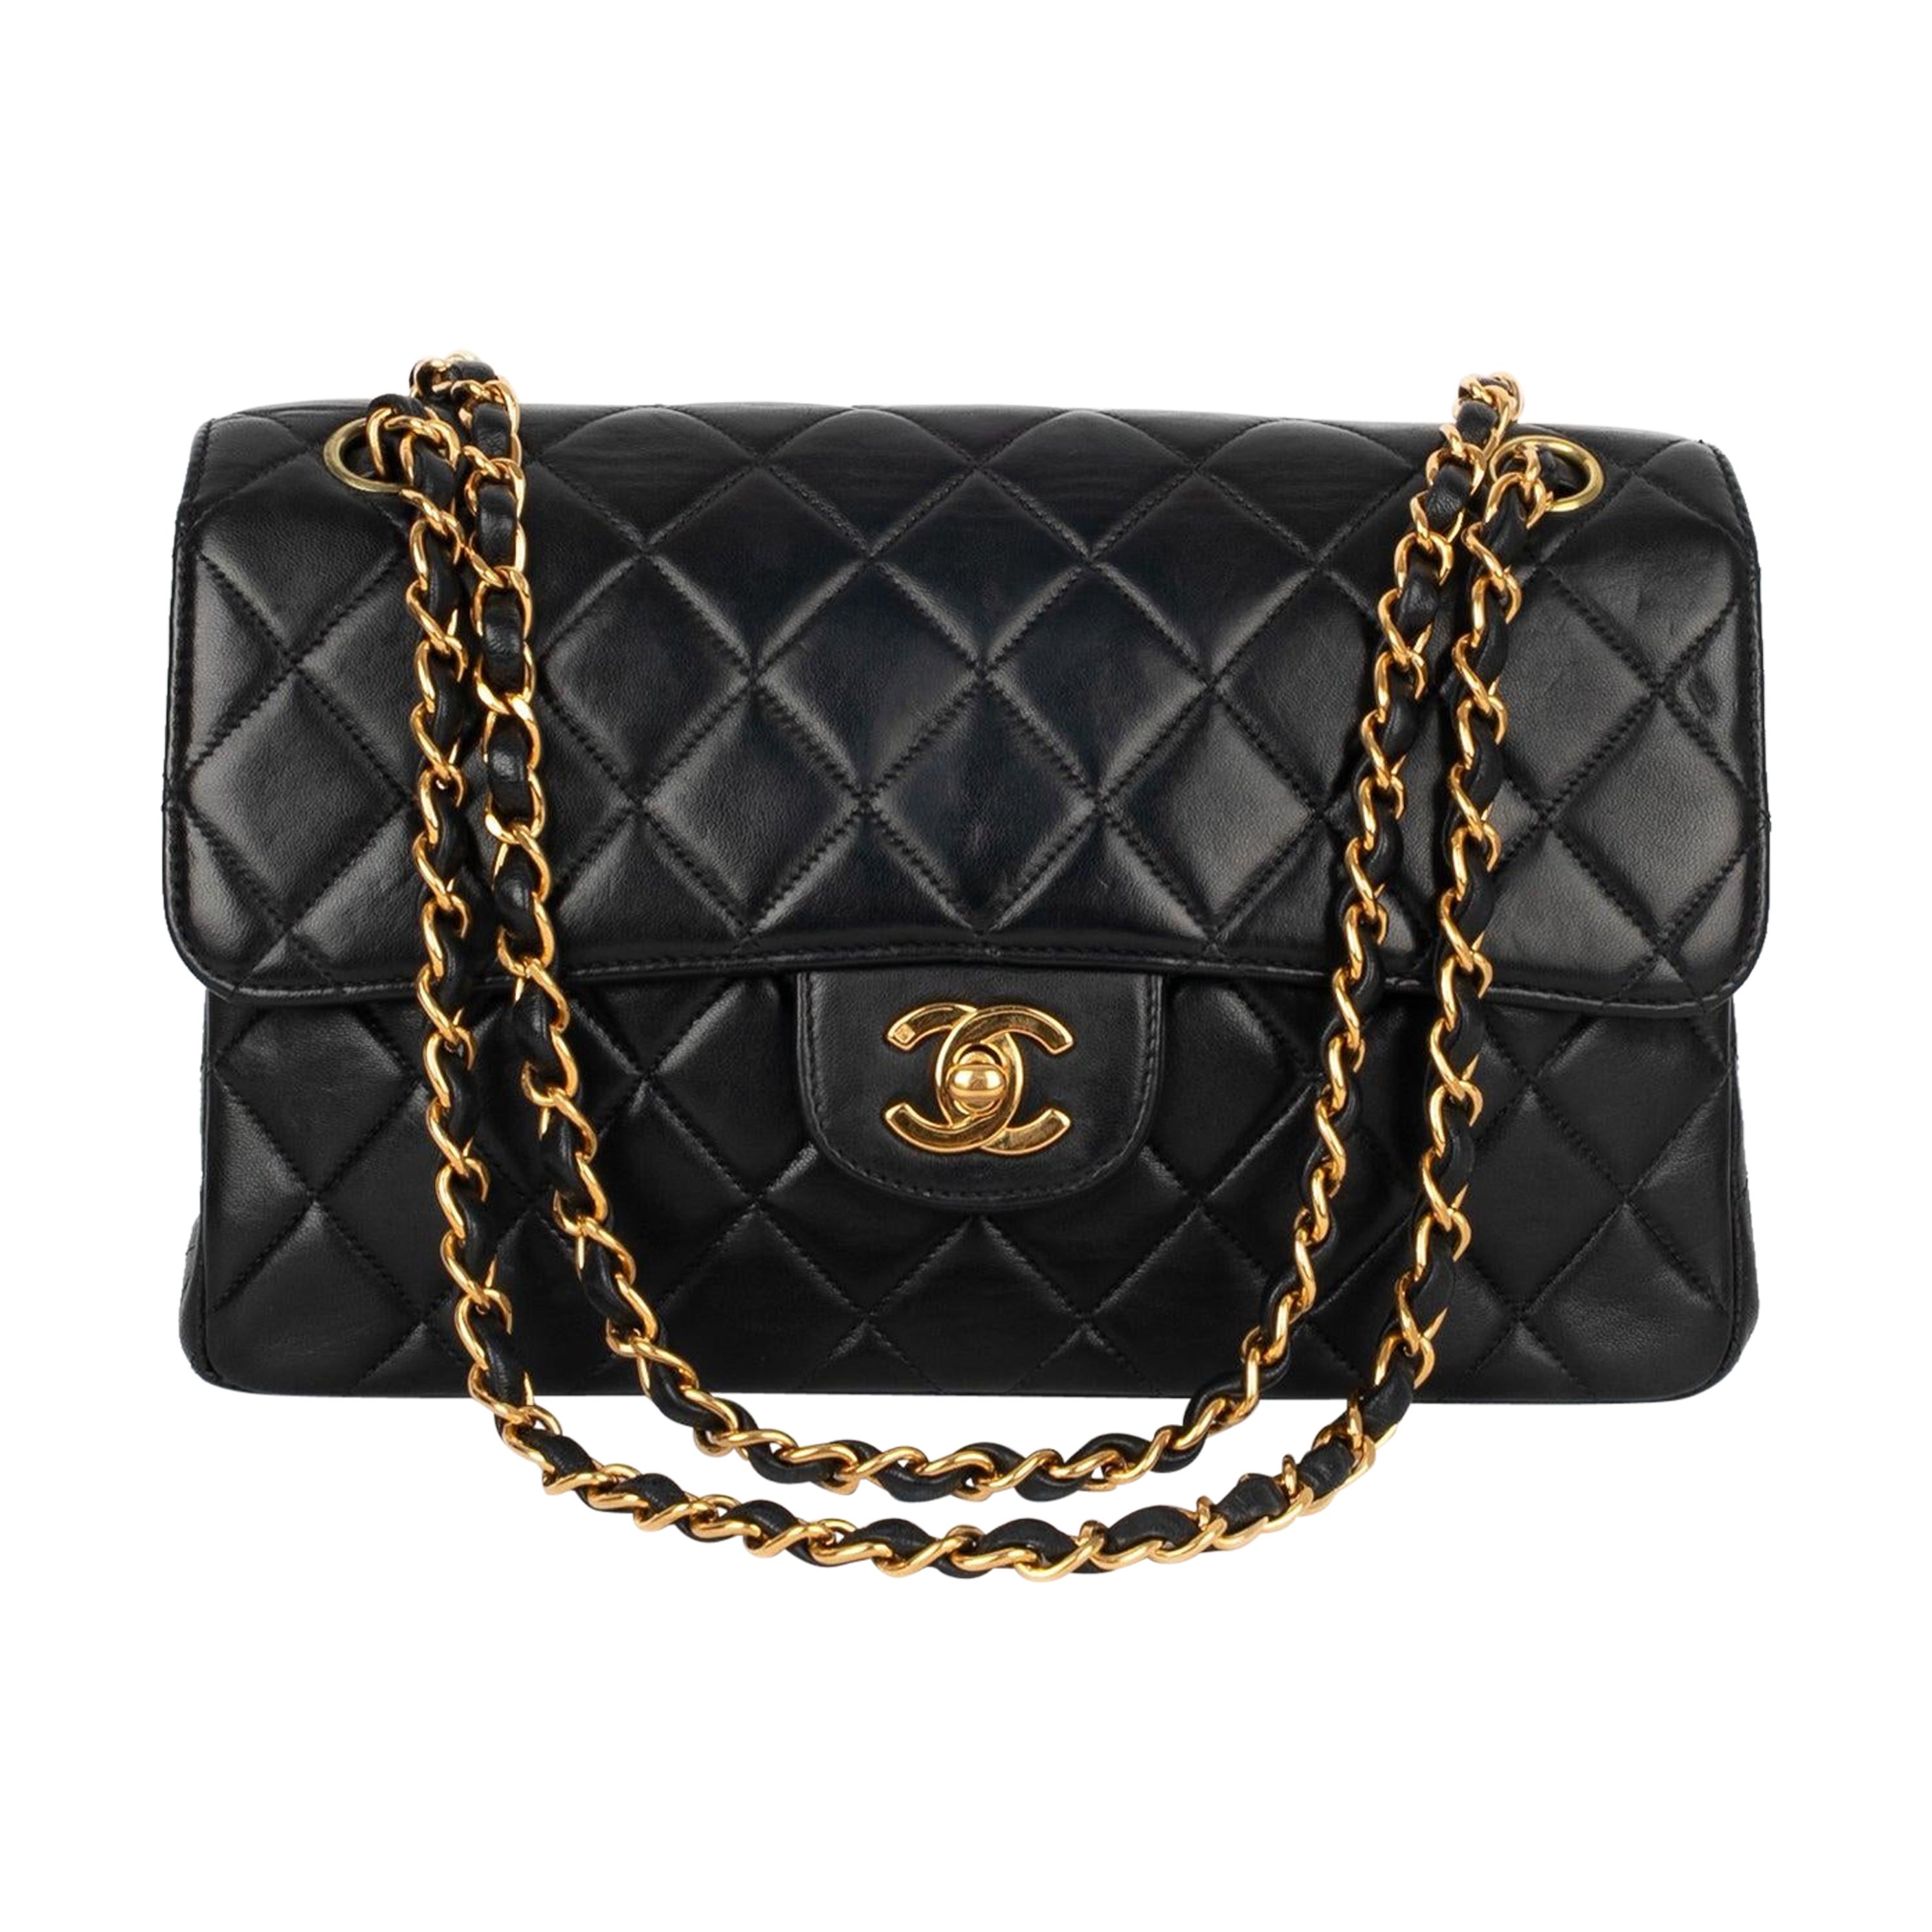 Chanel Timeless Quilted Black Leather Bag, 1996/1997 For Sale